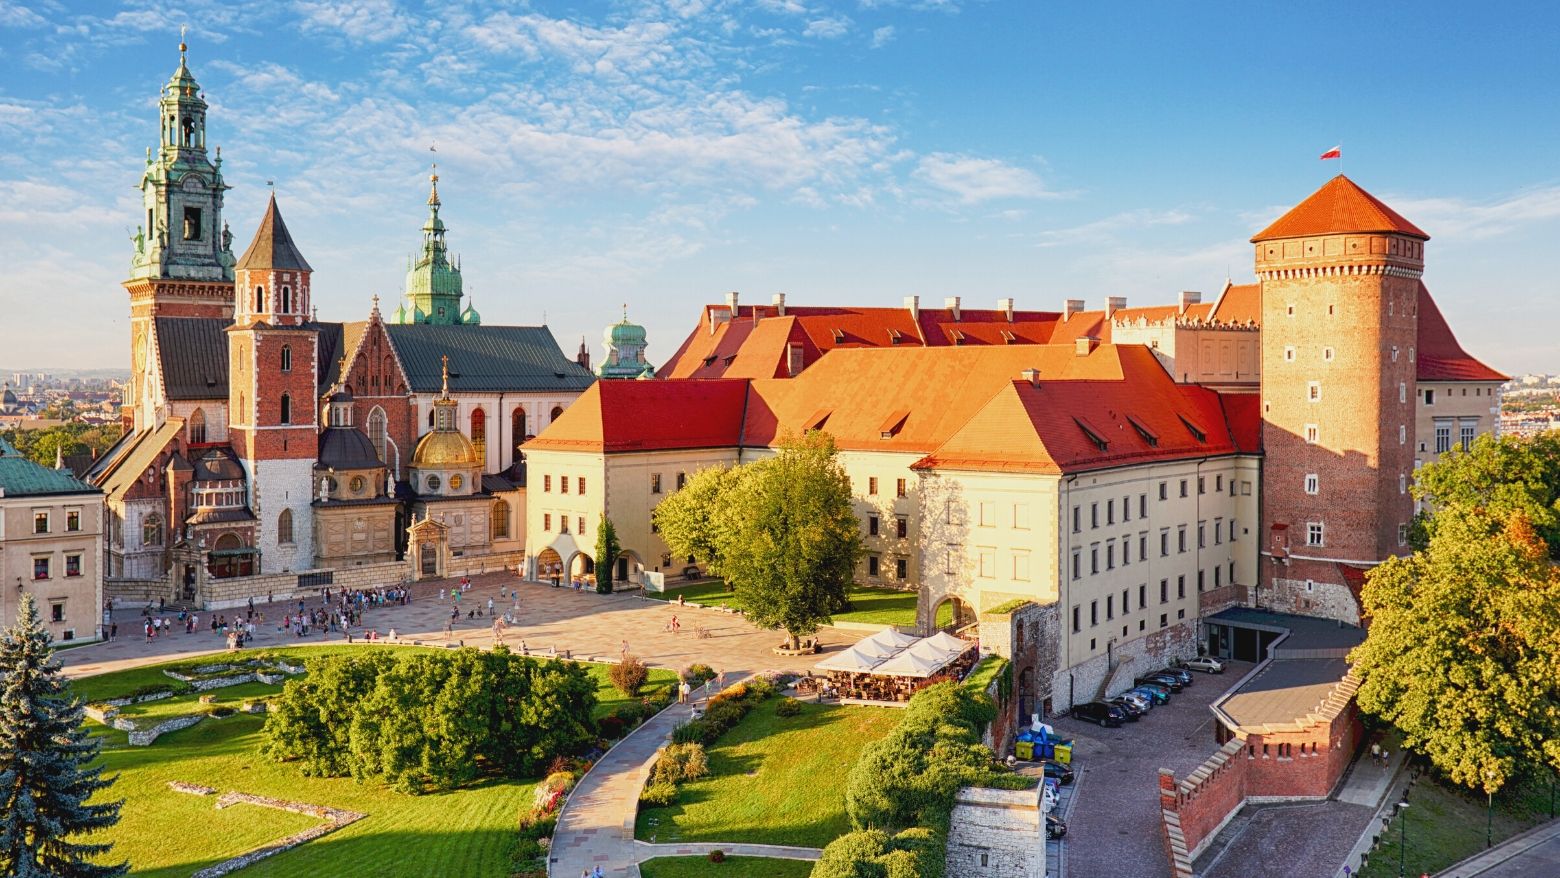 The Wawel Royal Castle in Cracow